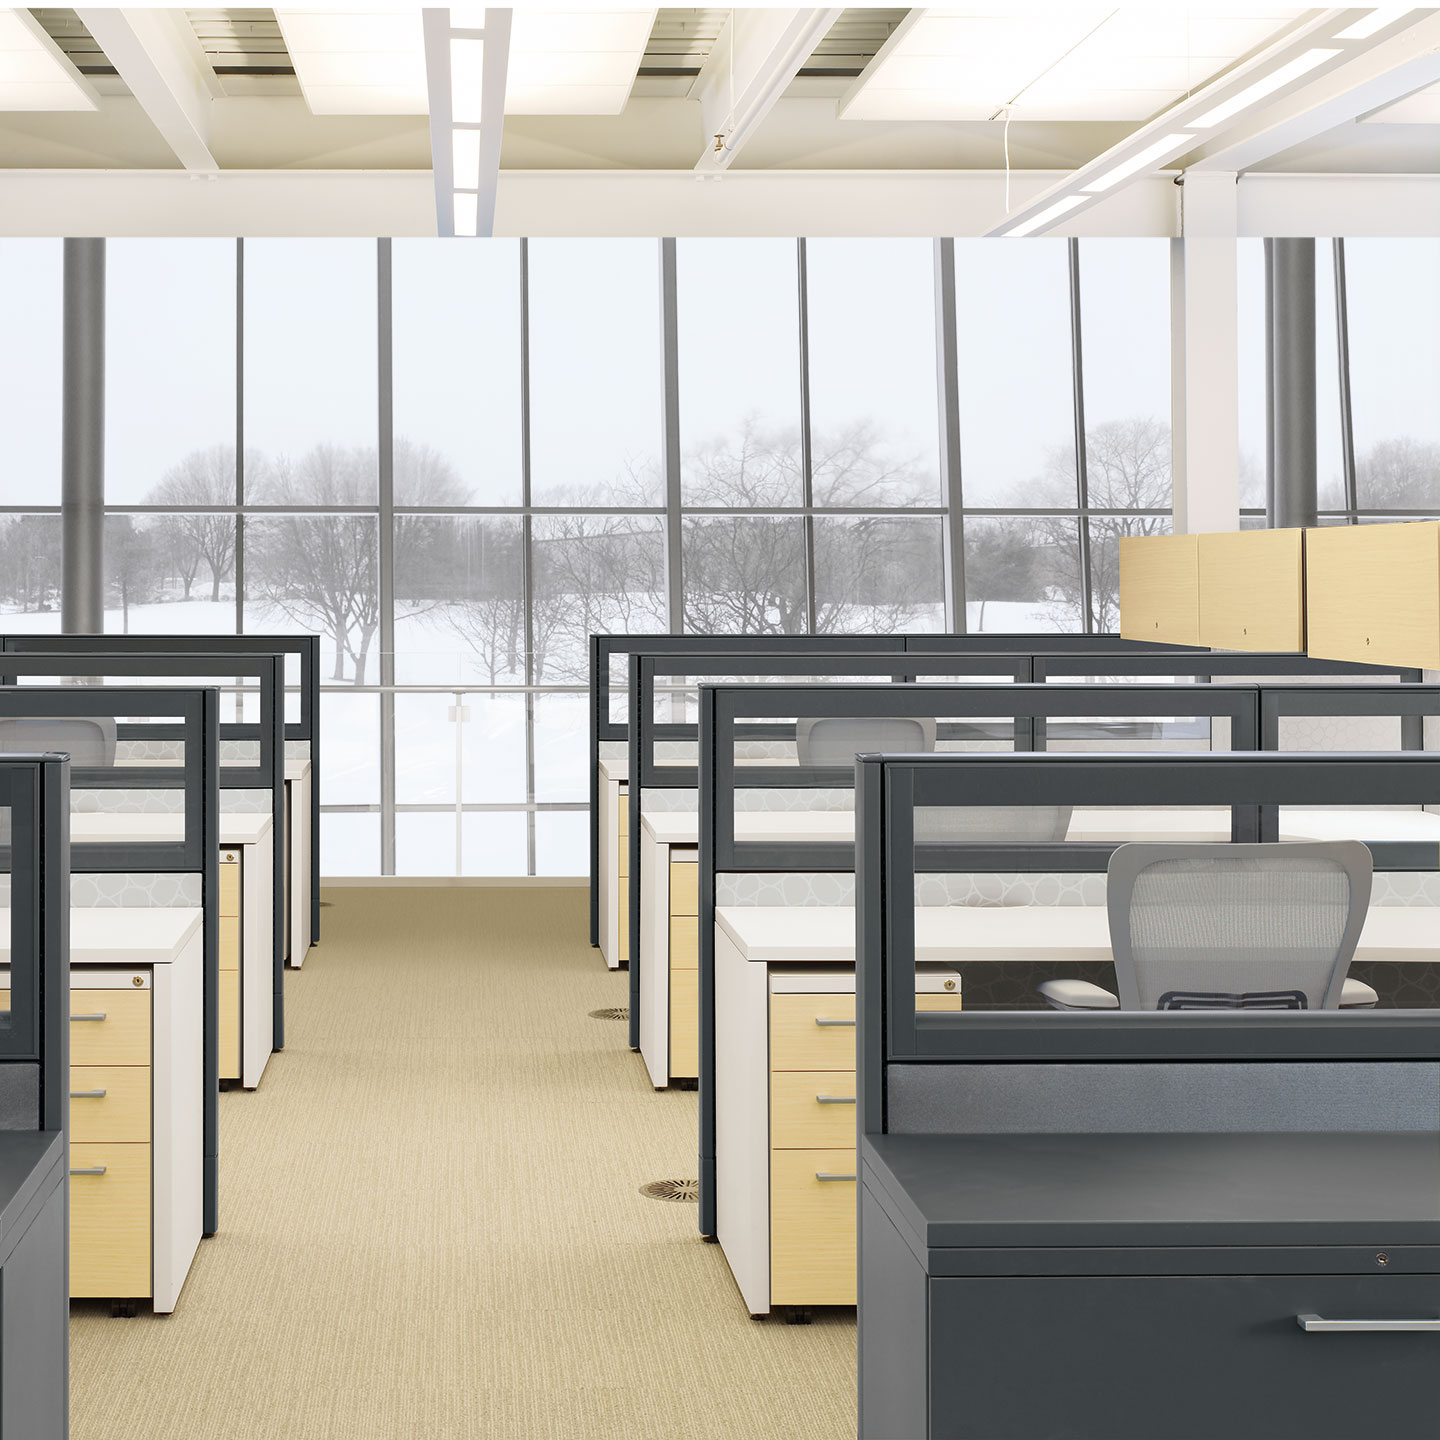 Details about   STEELCASE metal dividers set of 2 pieces for lateral file cabinets 30",36",42" 